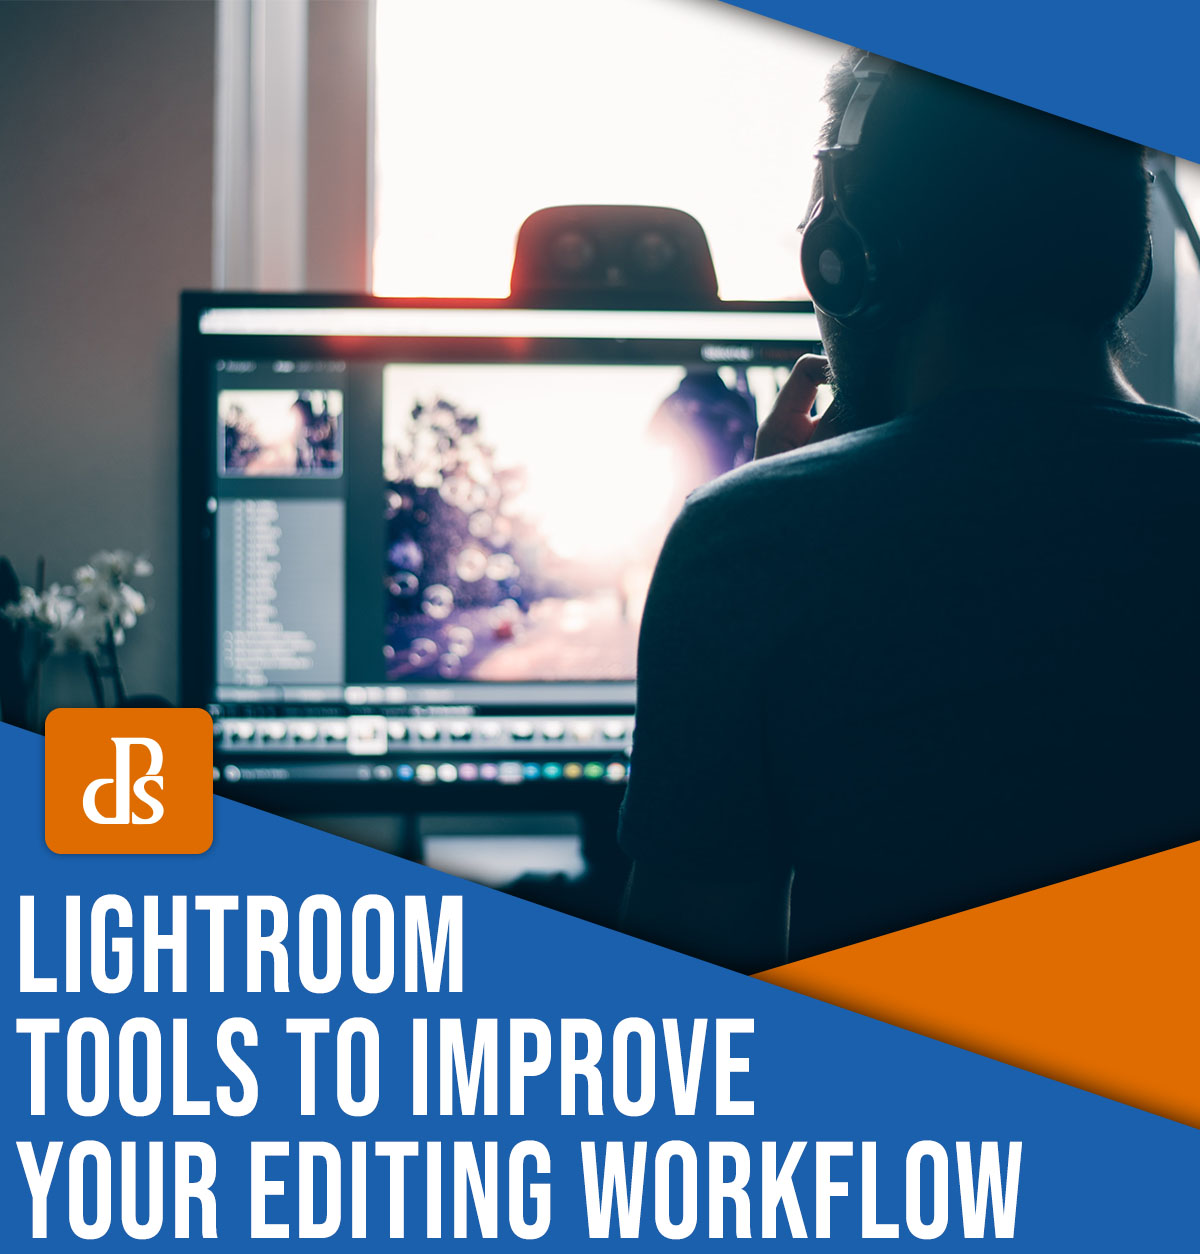 Lightroom tools to improve your editing workflow